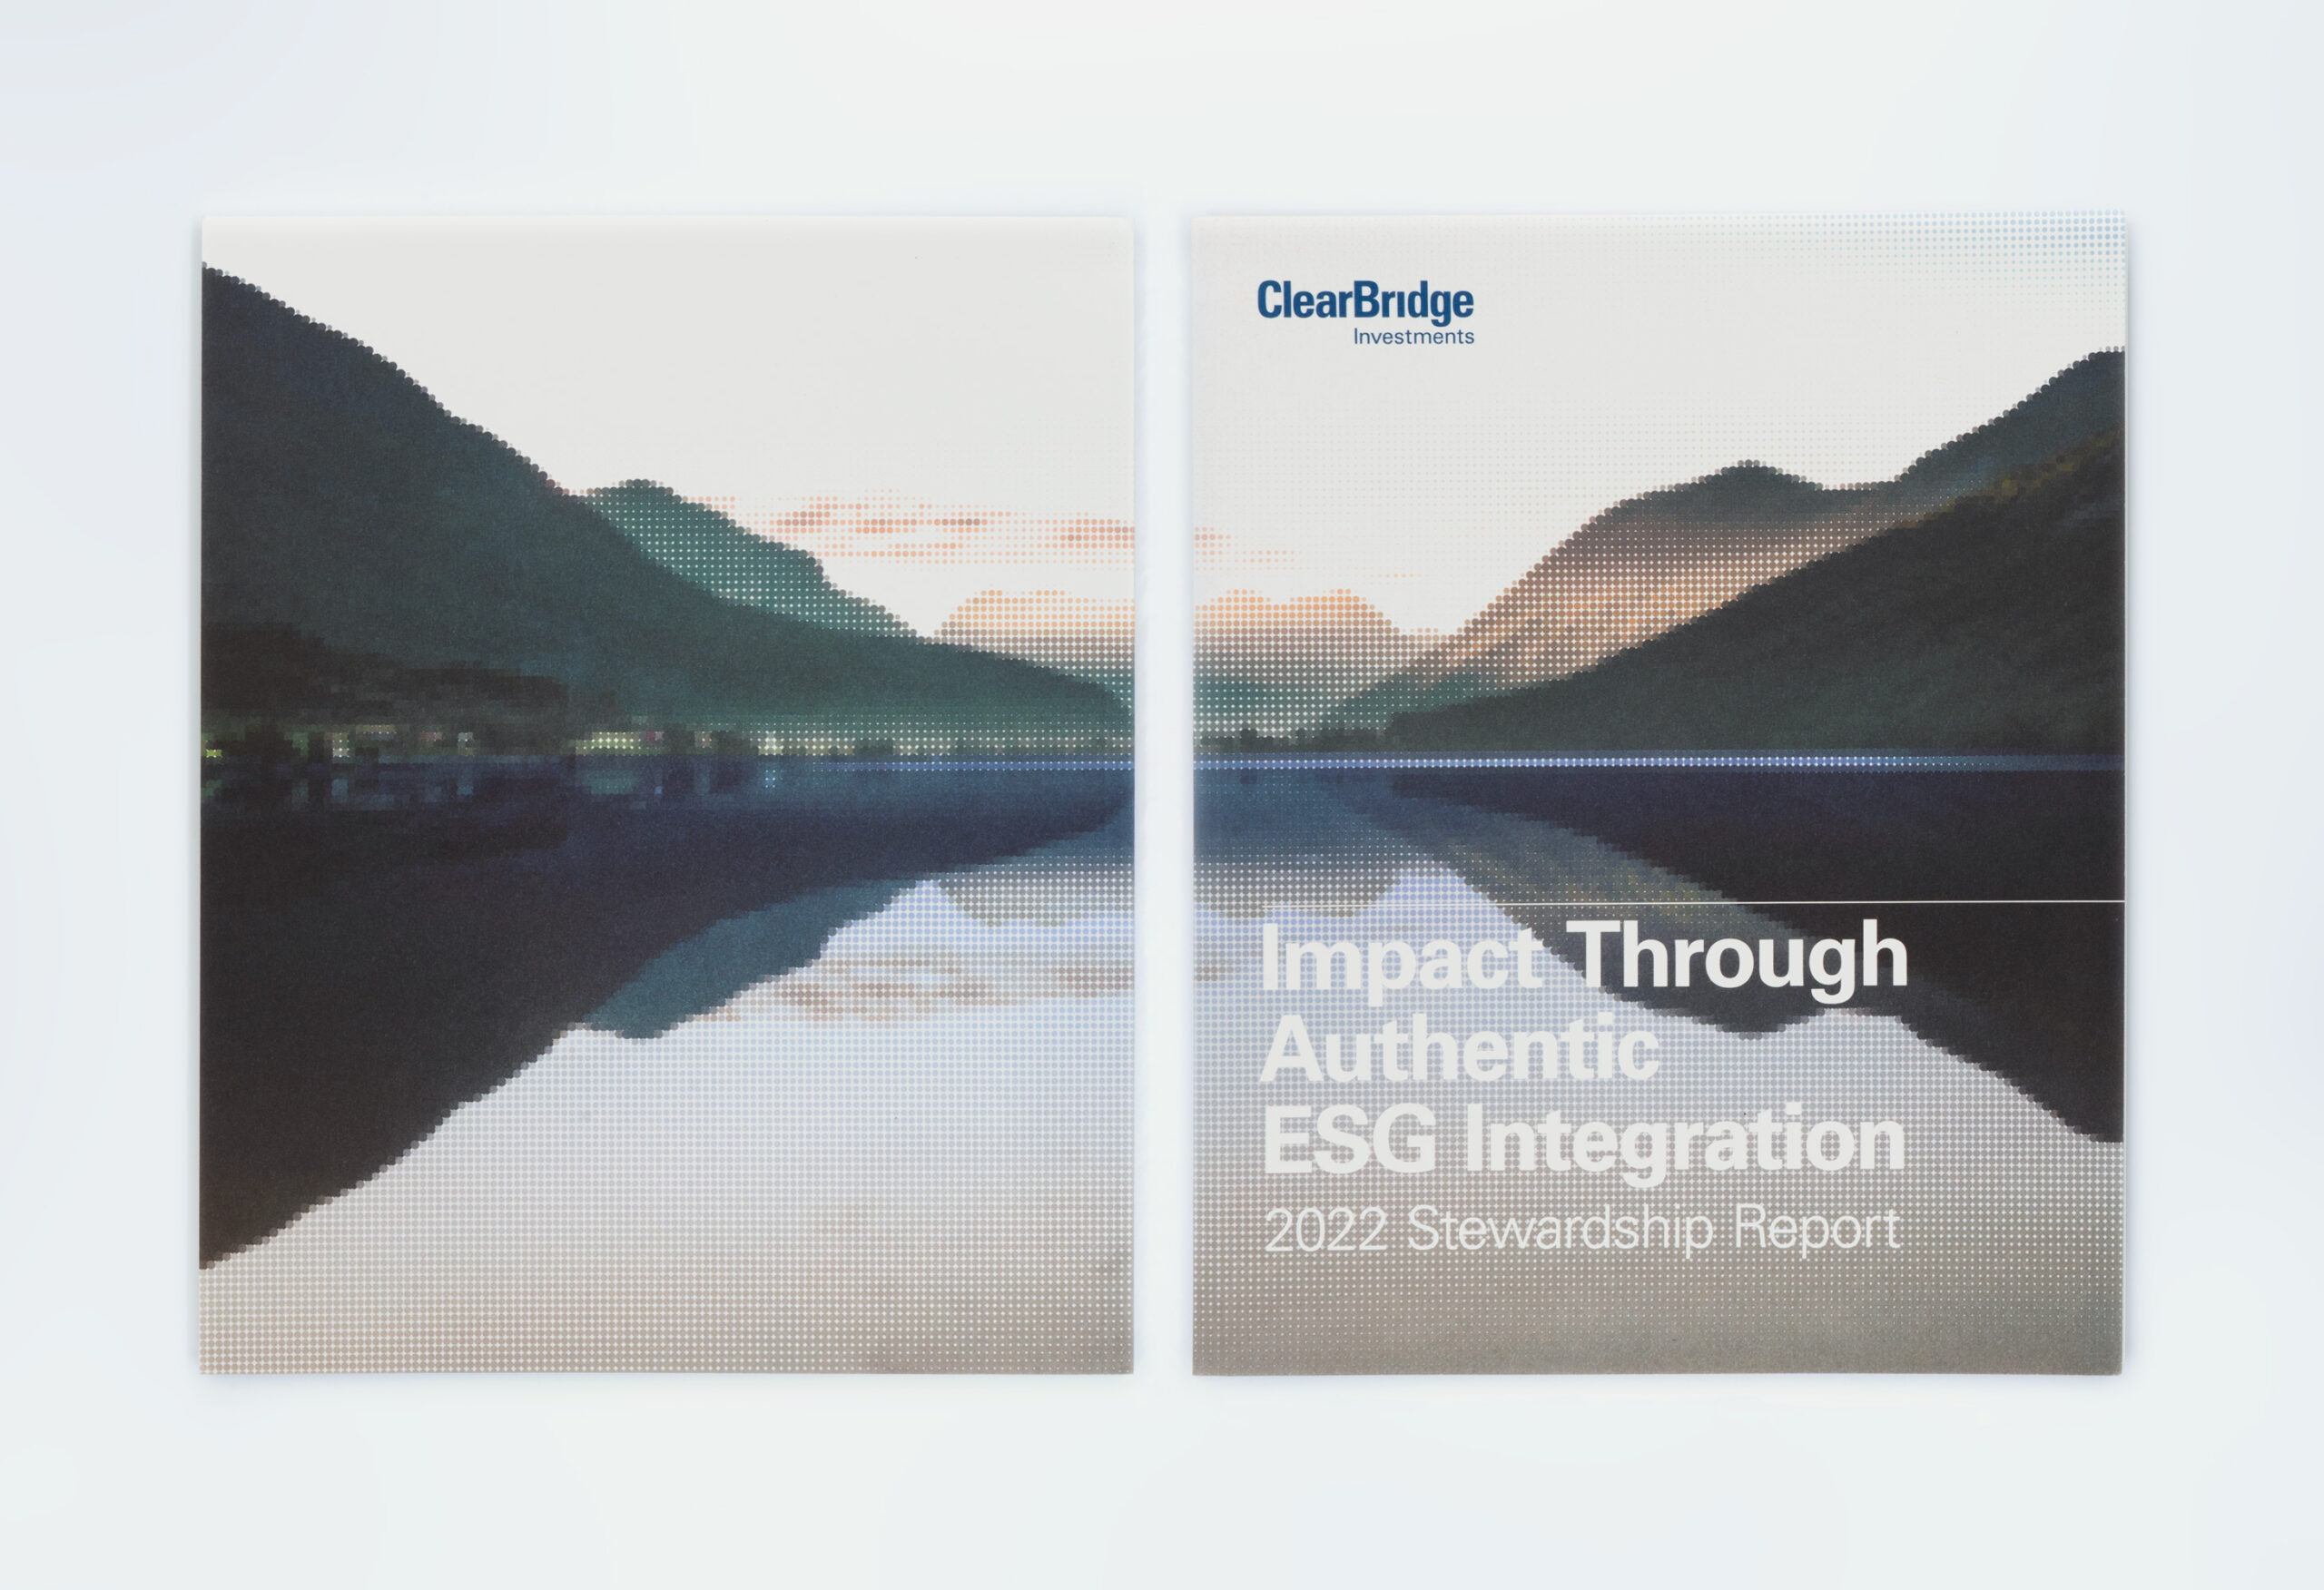 Print collateral for ClearBridge Stewardship Report 2022